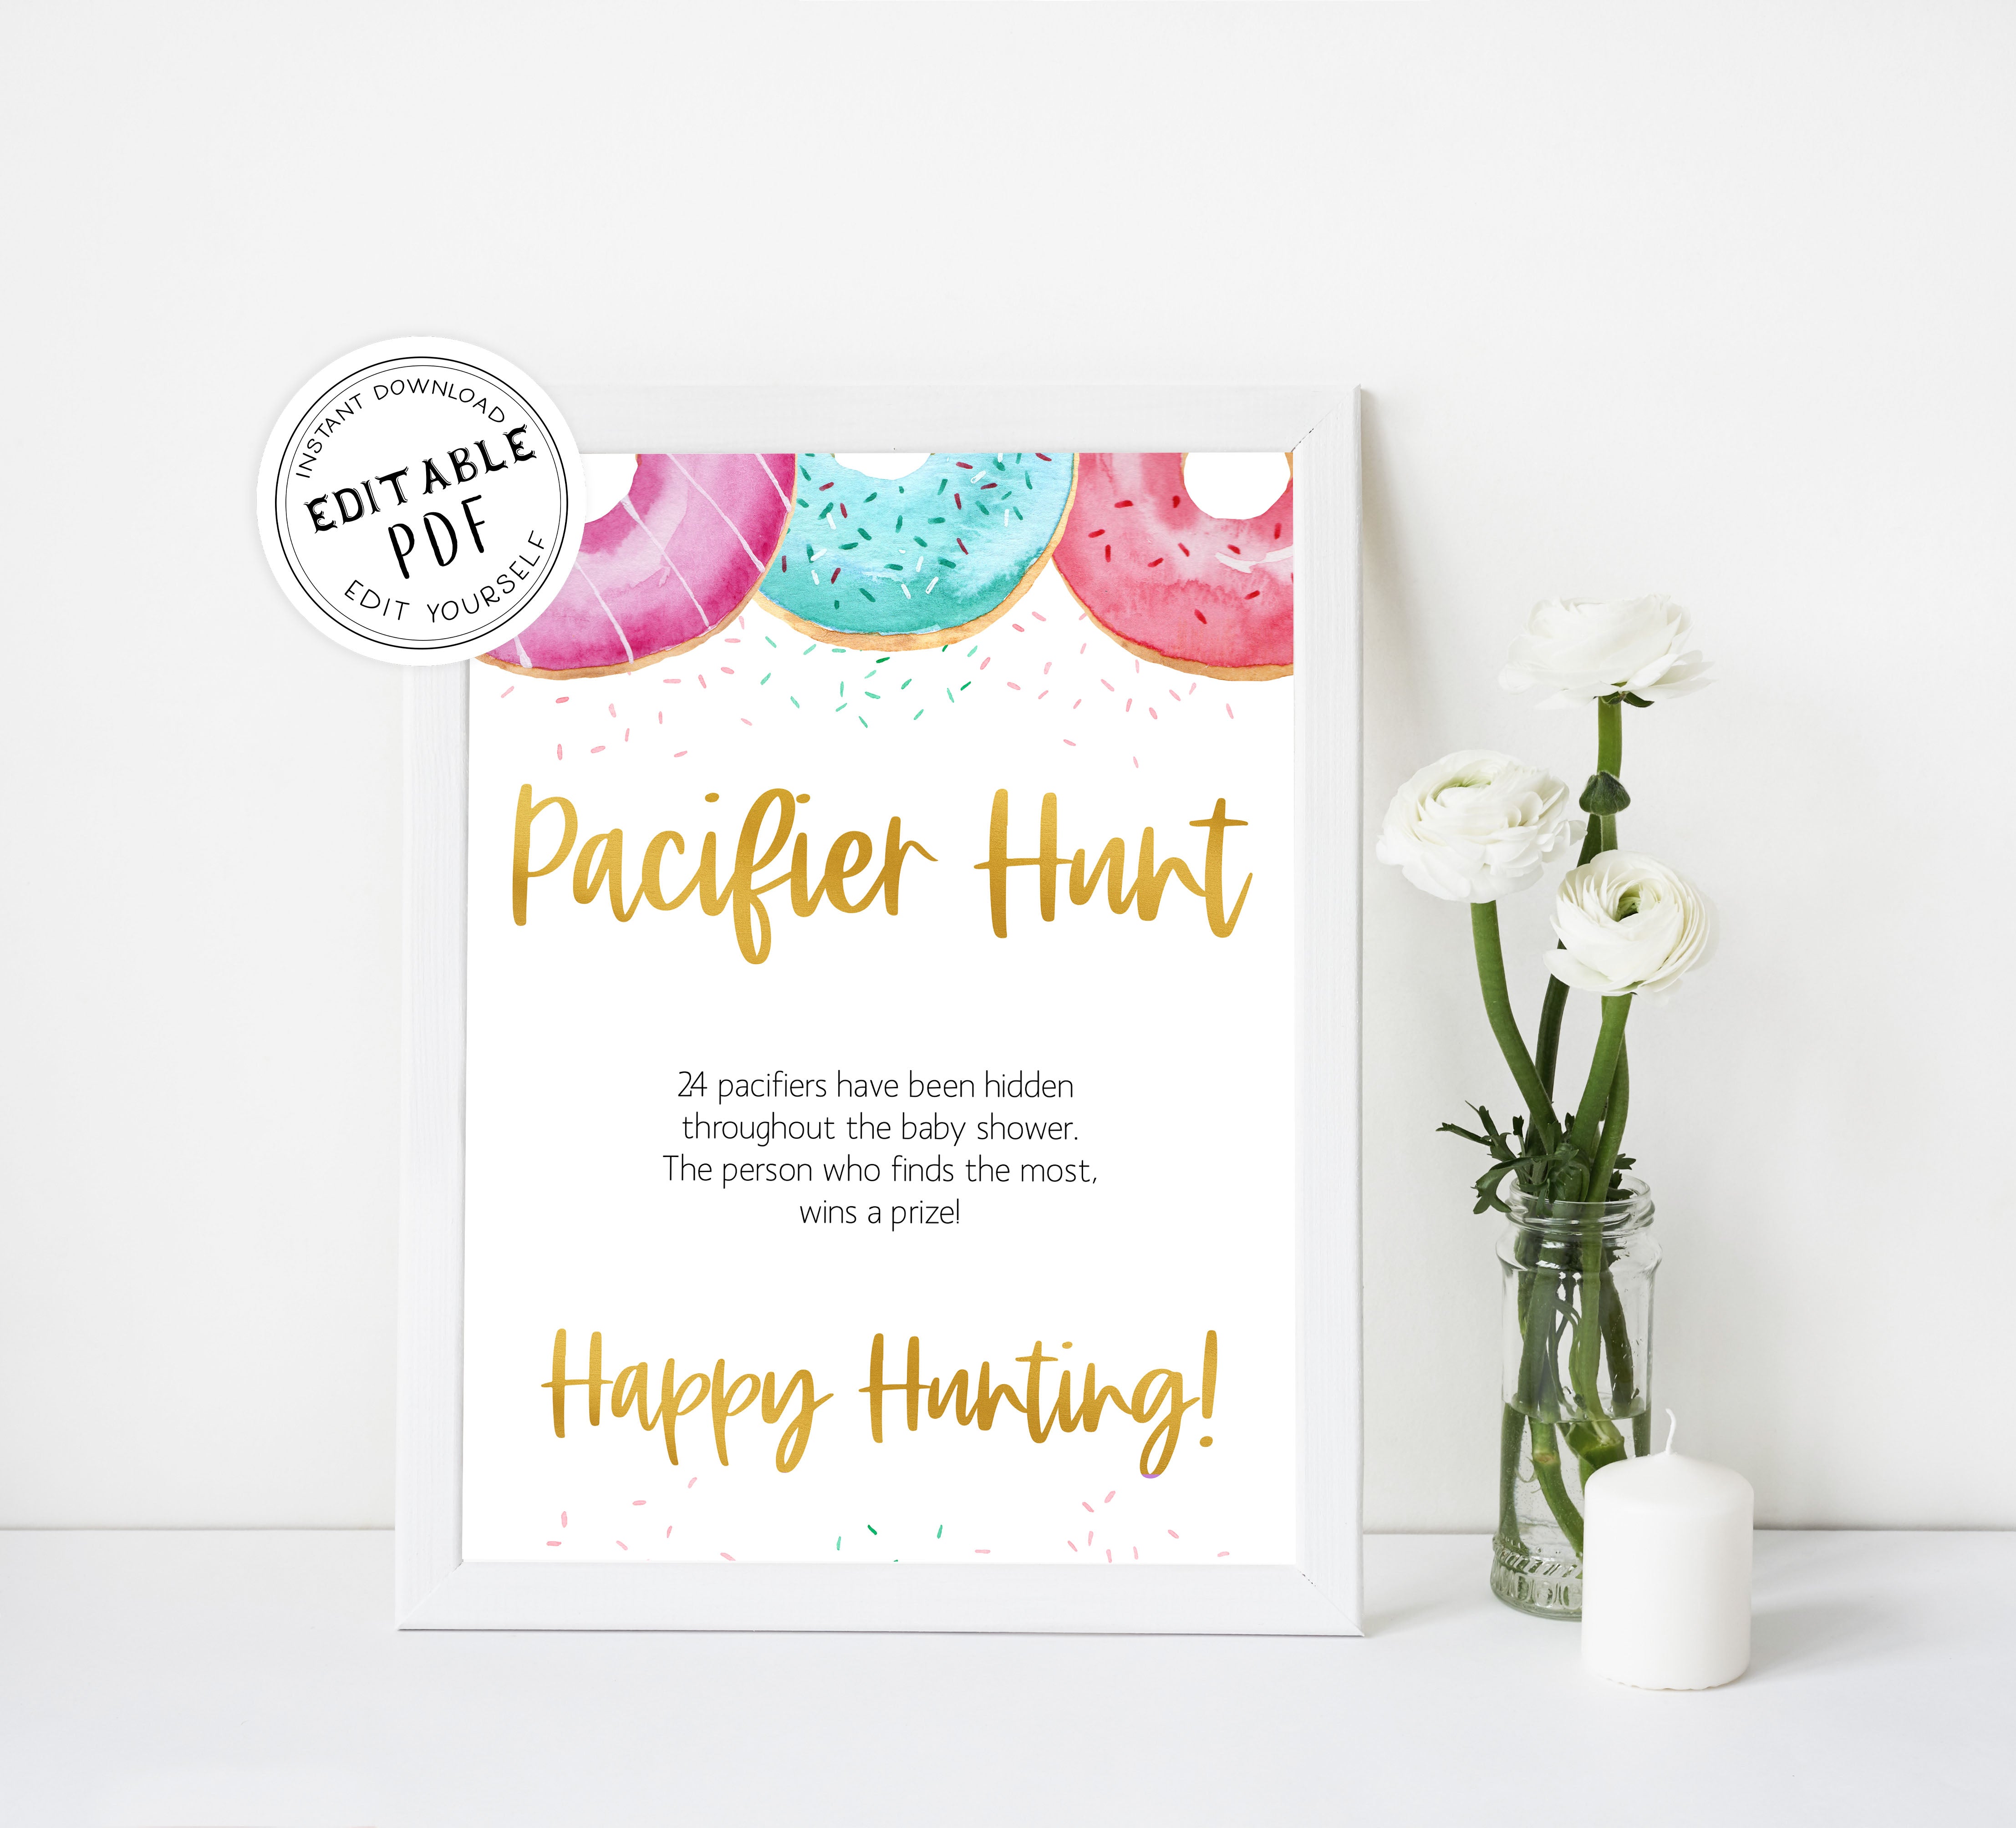 editable baby games, pacifier hunt game, Printable baby shower games, donut baby games, baby shower games, fun baby shower ideas, top baby shower ideas, donut sprinkles baby shower, baby shower games, fun donut baby shower ideas